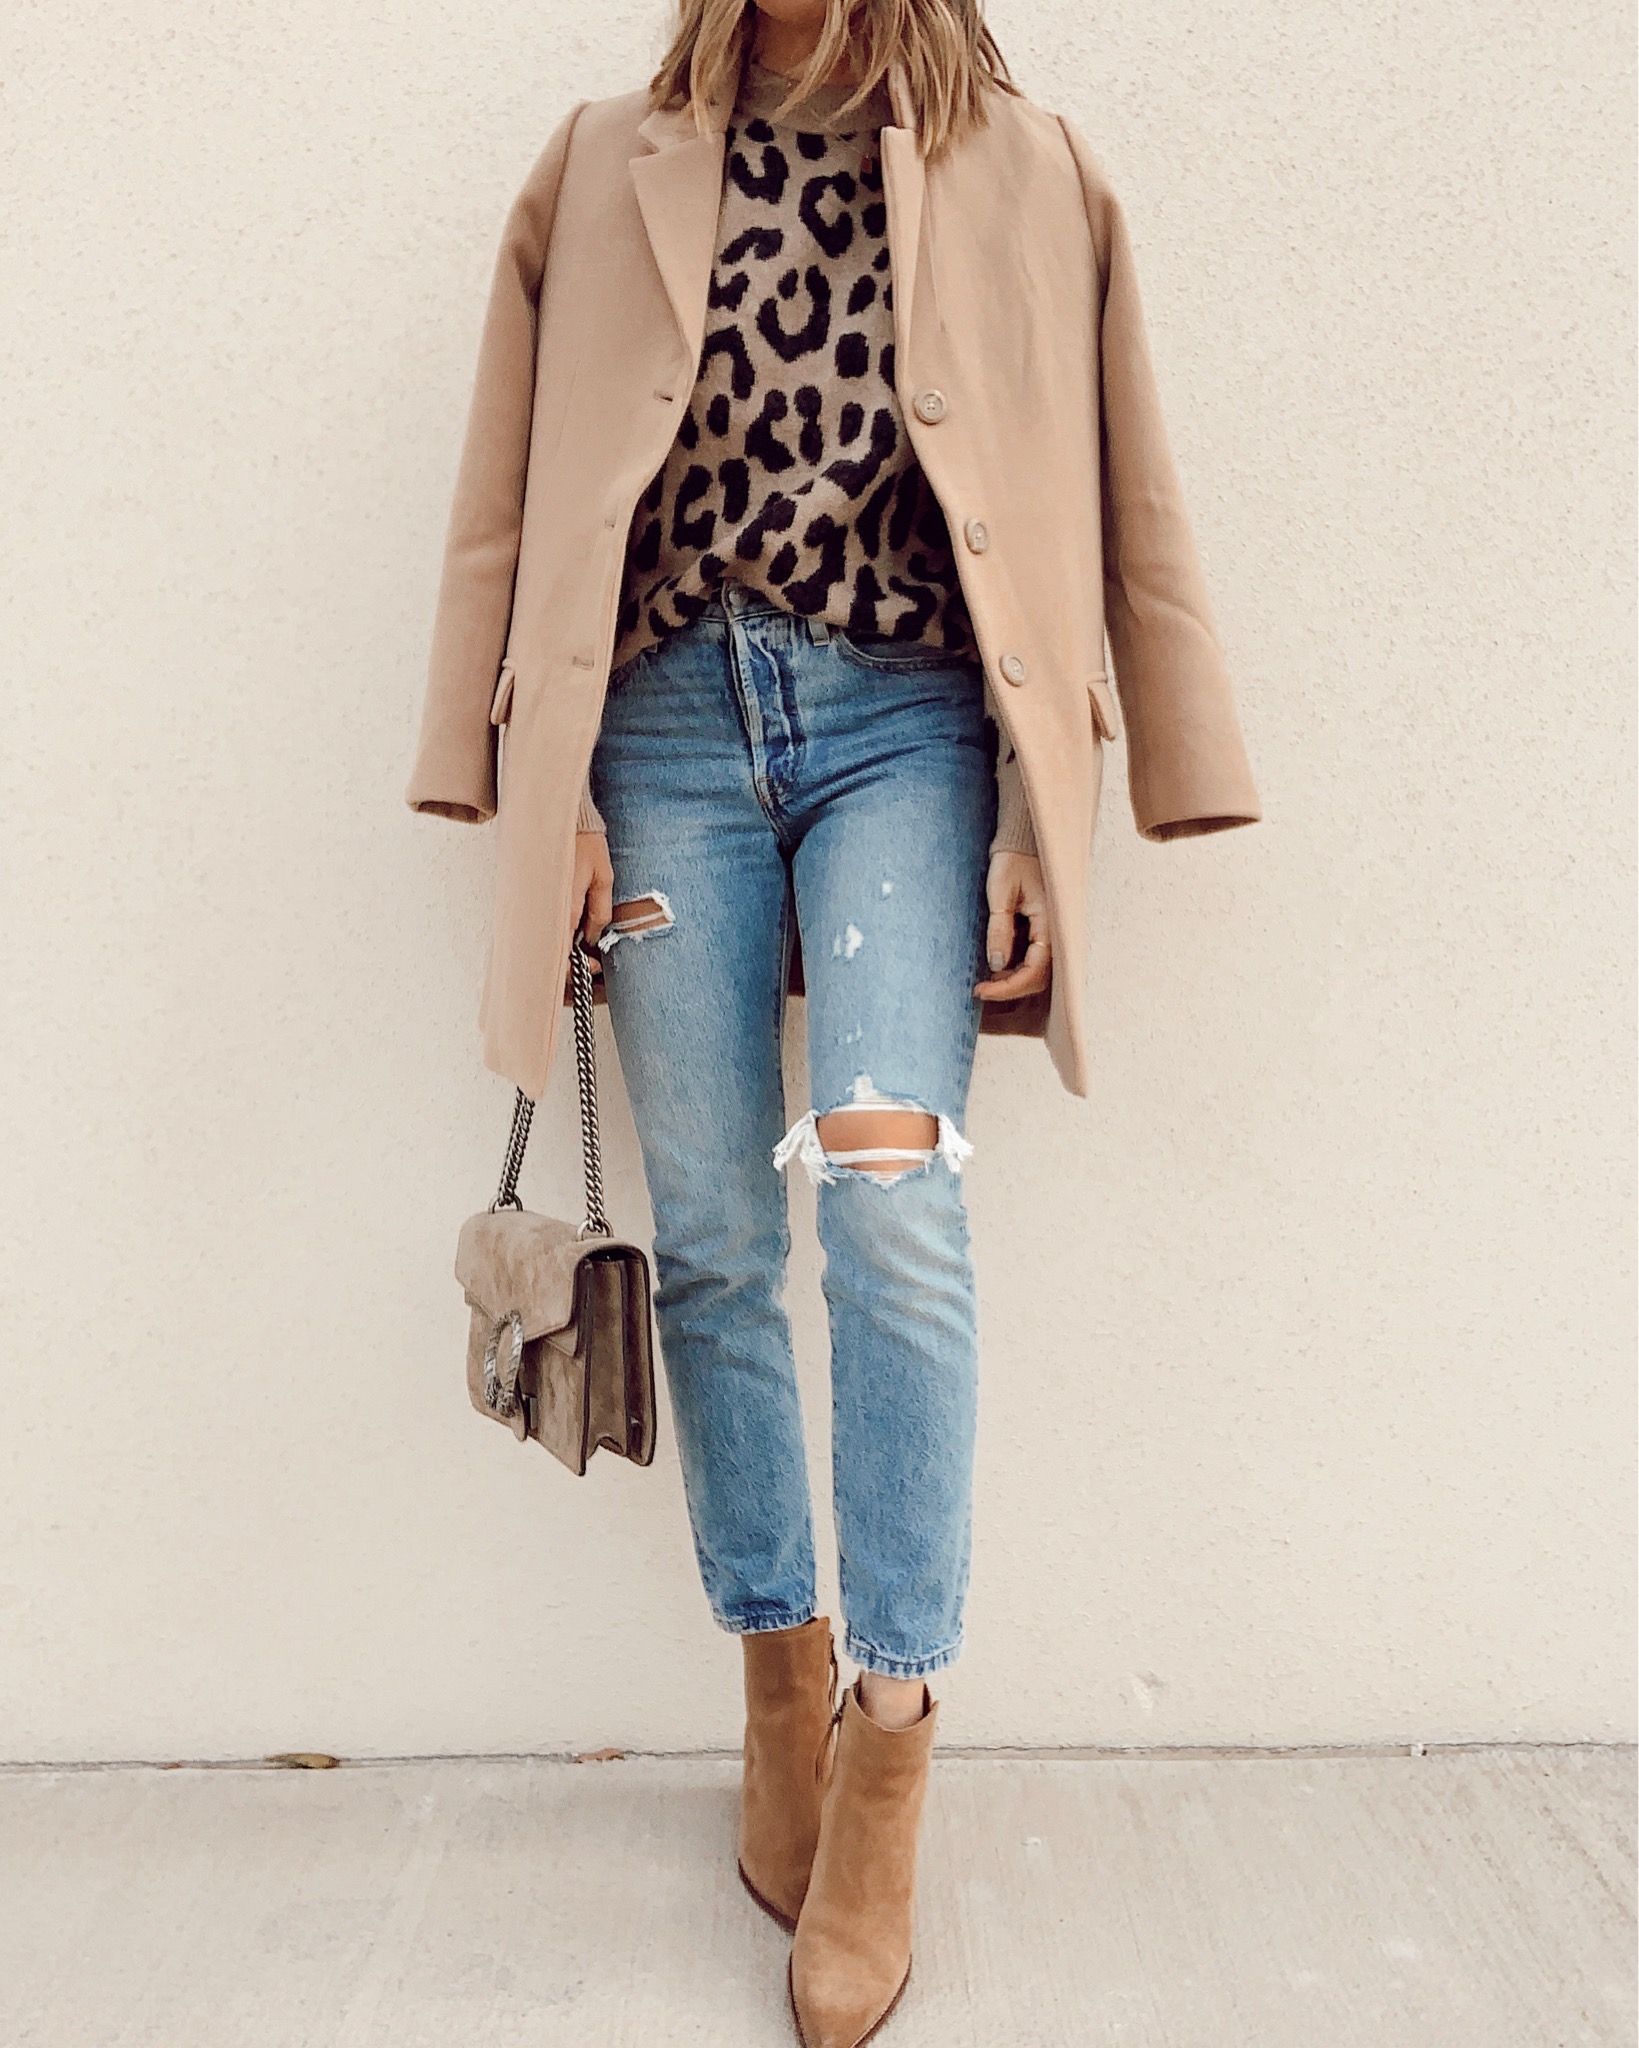 fall leopard sweater outfit idea with jeans and booties